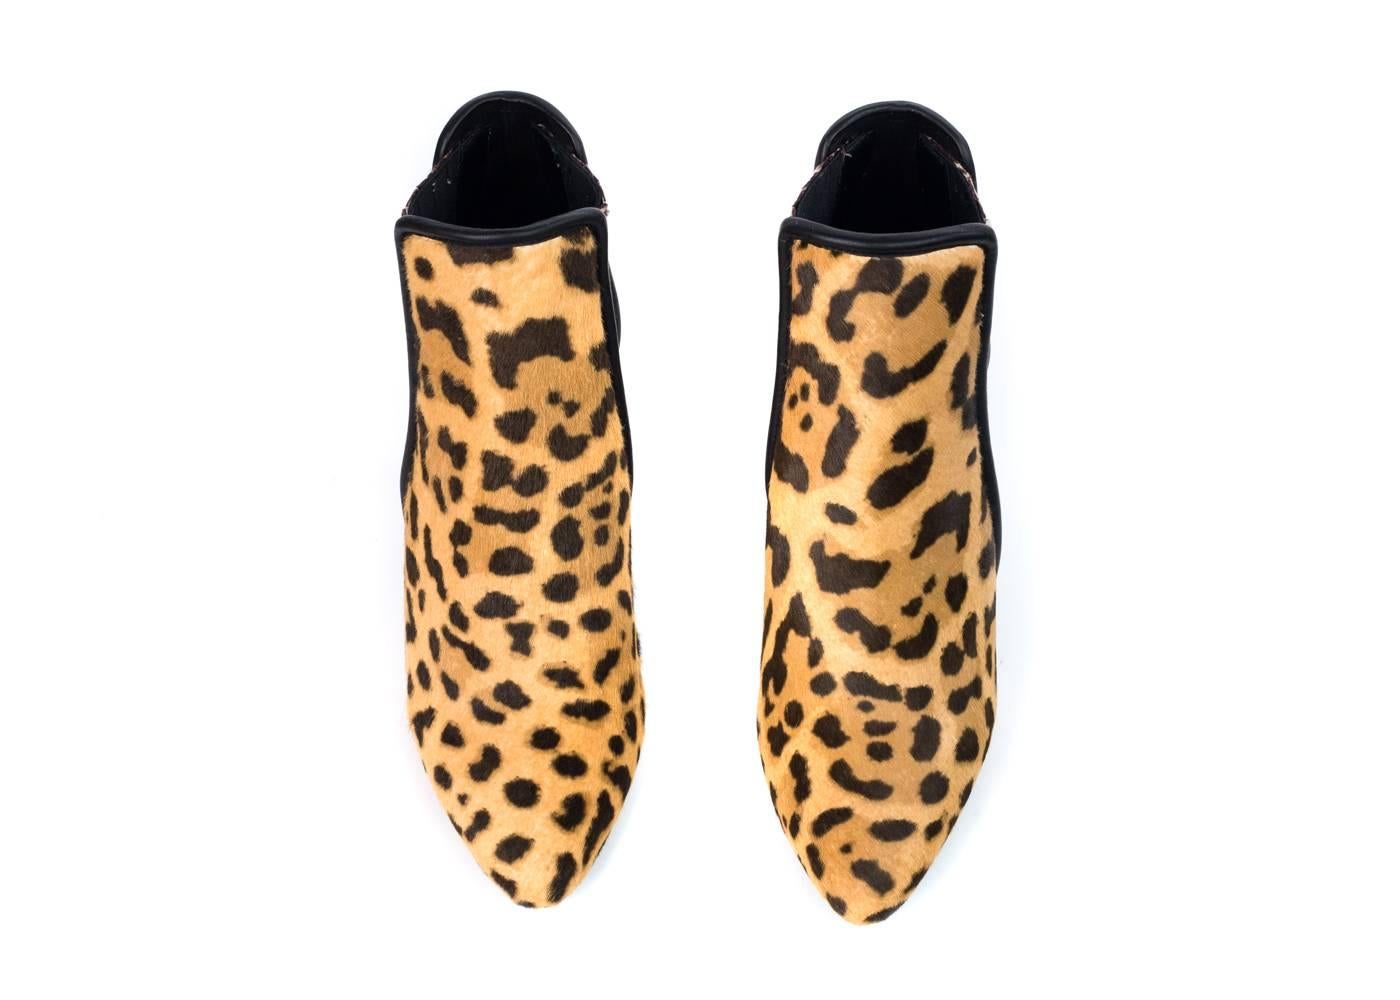 Brand New Roberto Cavalli Ankle Boots
Original Box & Dust Bag Included
Retails in Stores & Online for $1450
Size IT36 / US6 Fits True to Size

Roberto Cavalli's leopard print ankle boots feature a black leather trim. These ankle boots are sure to